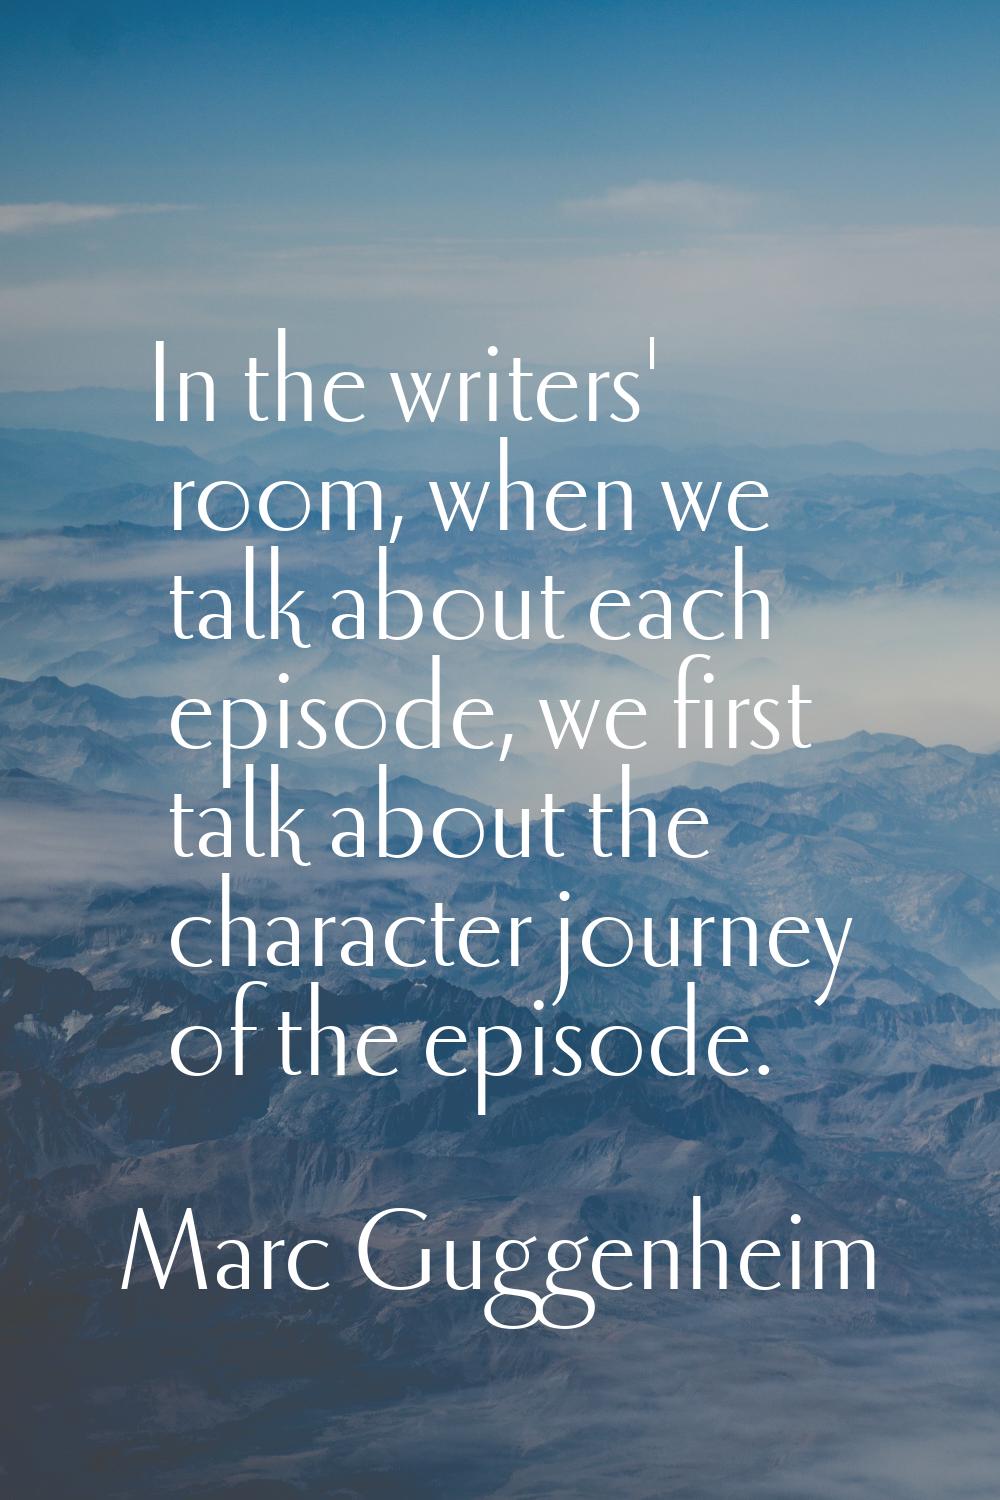 In the writers' room, when we talk about each episode, we first talk about the character journey of